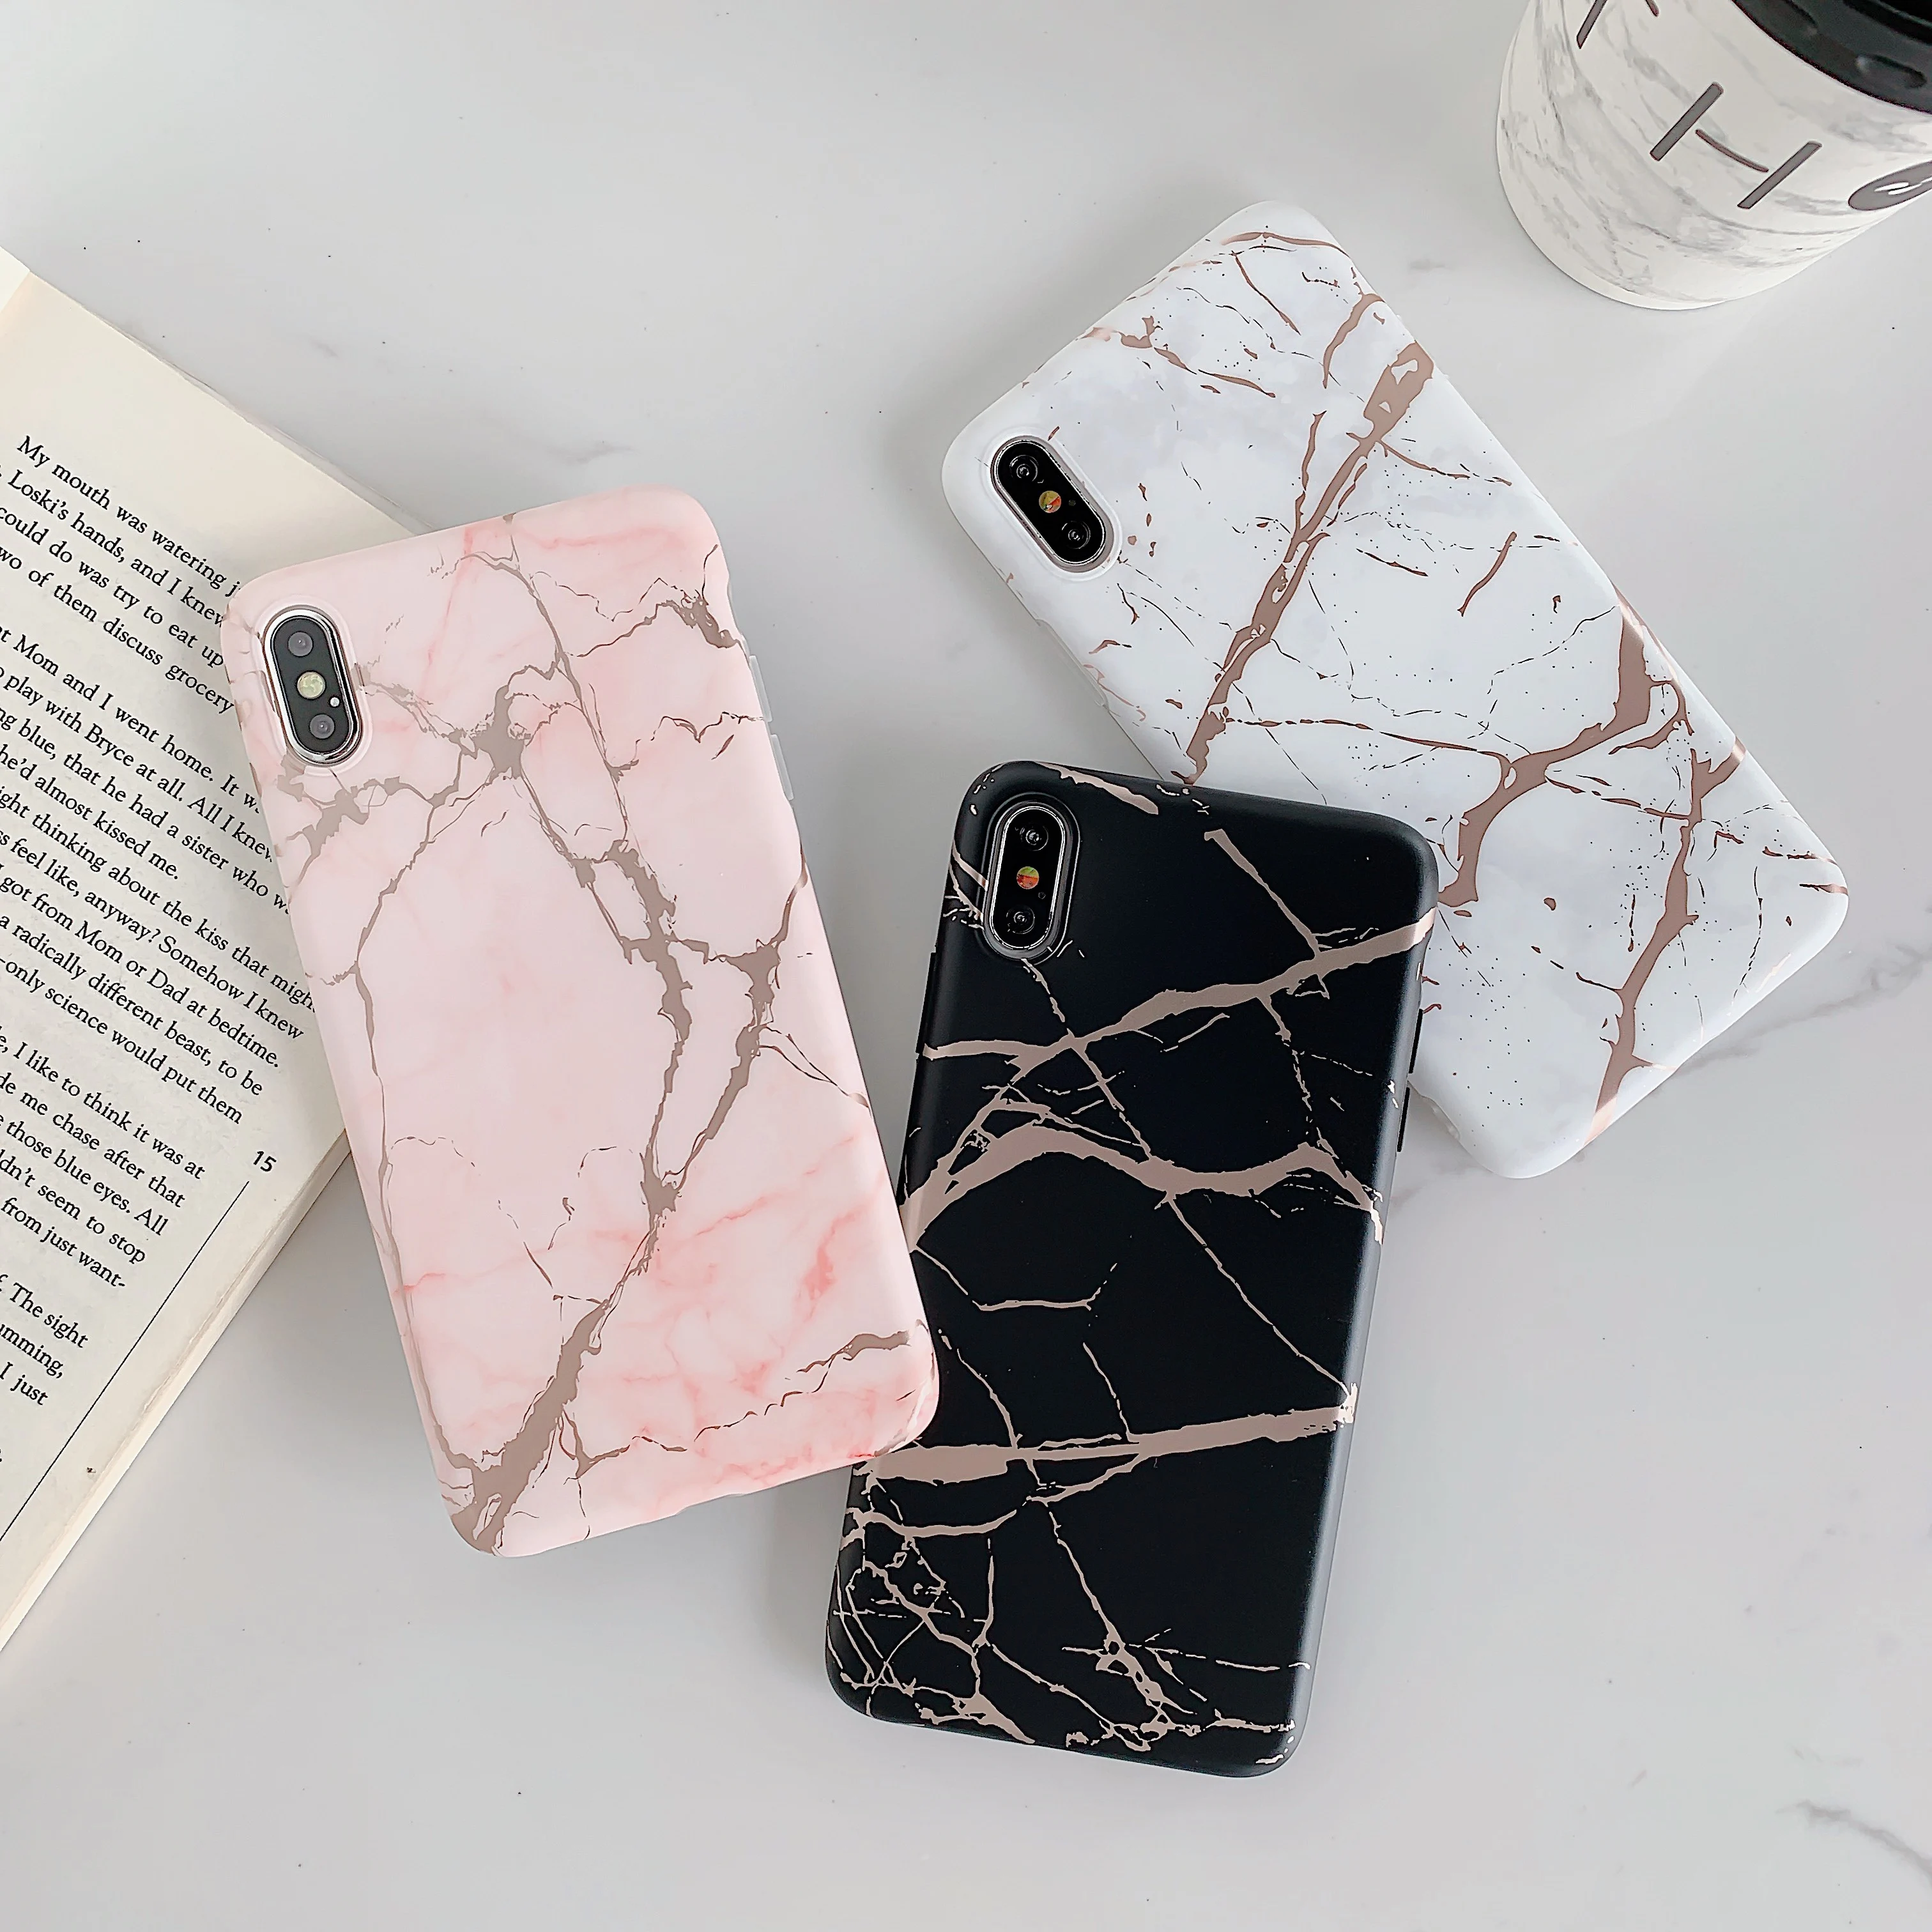 Gilding Gold Blocking Tpu Silicon Matte Cell Phone Case For Iphone Xs Max Xr For Iphone 8 Plus Marble Case Buy Marble Case For Iphone 7 Marble Case For Iphone 8 Case For Iphone